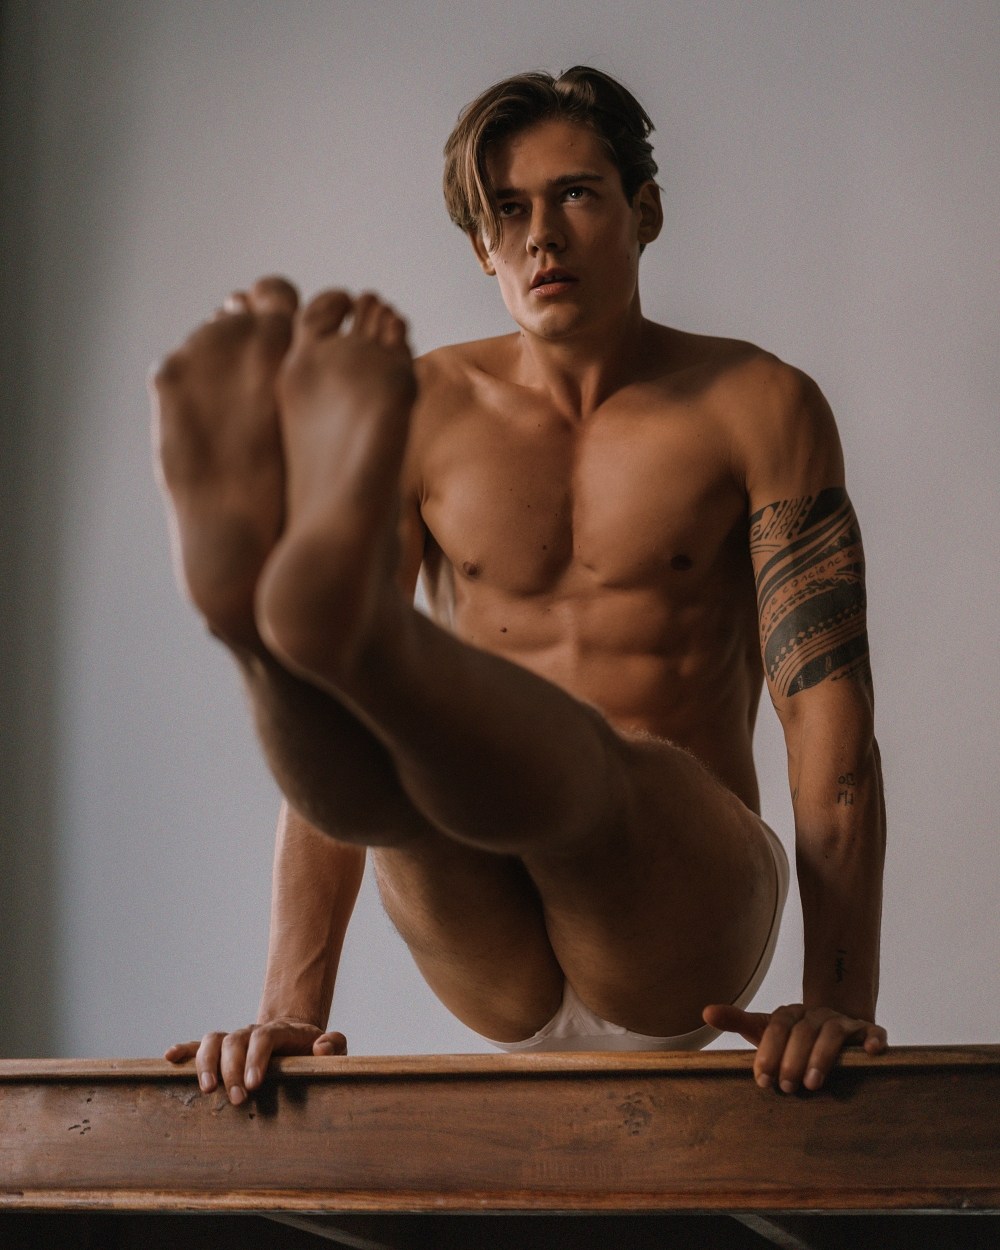 Mario adrion onlyfans naked picture